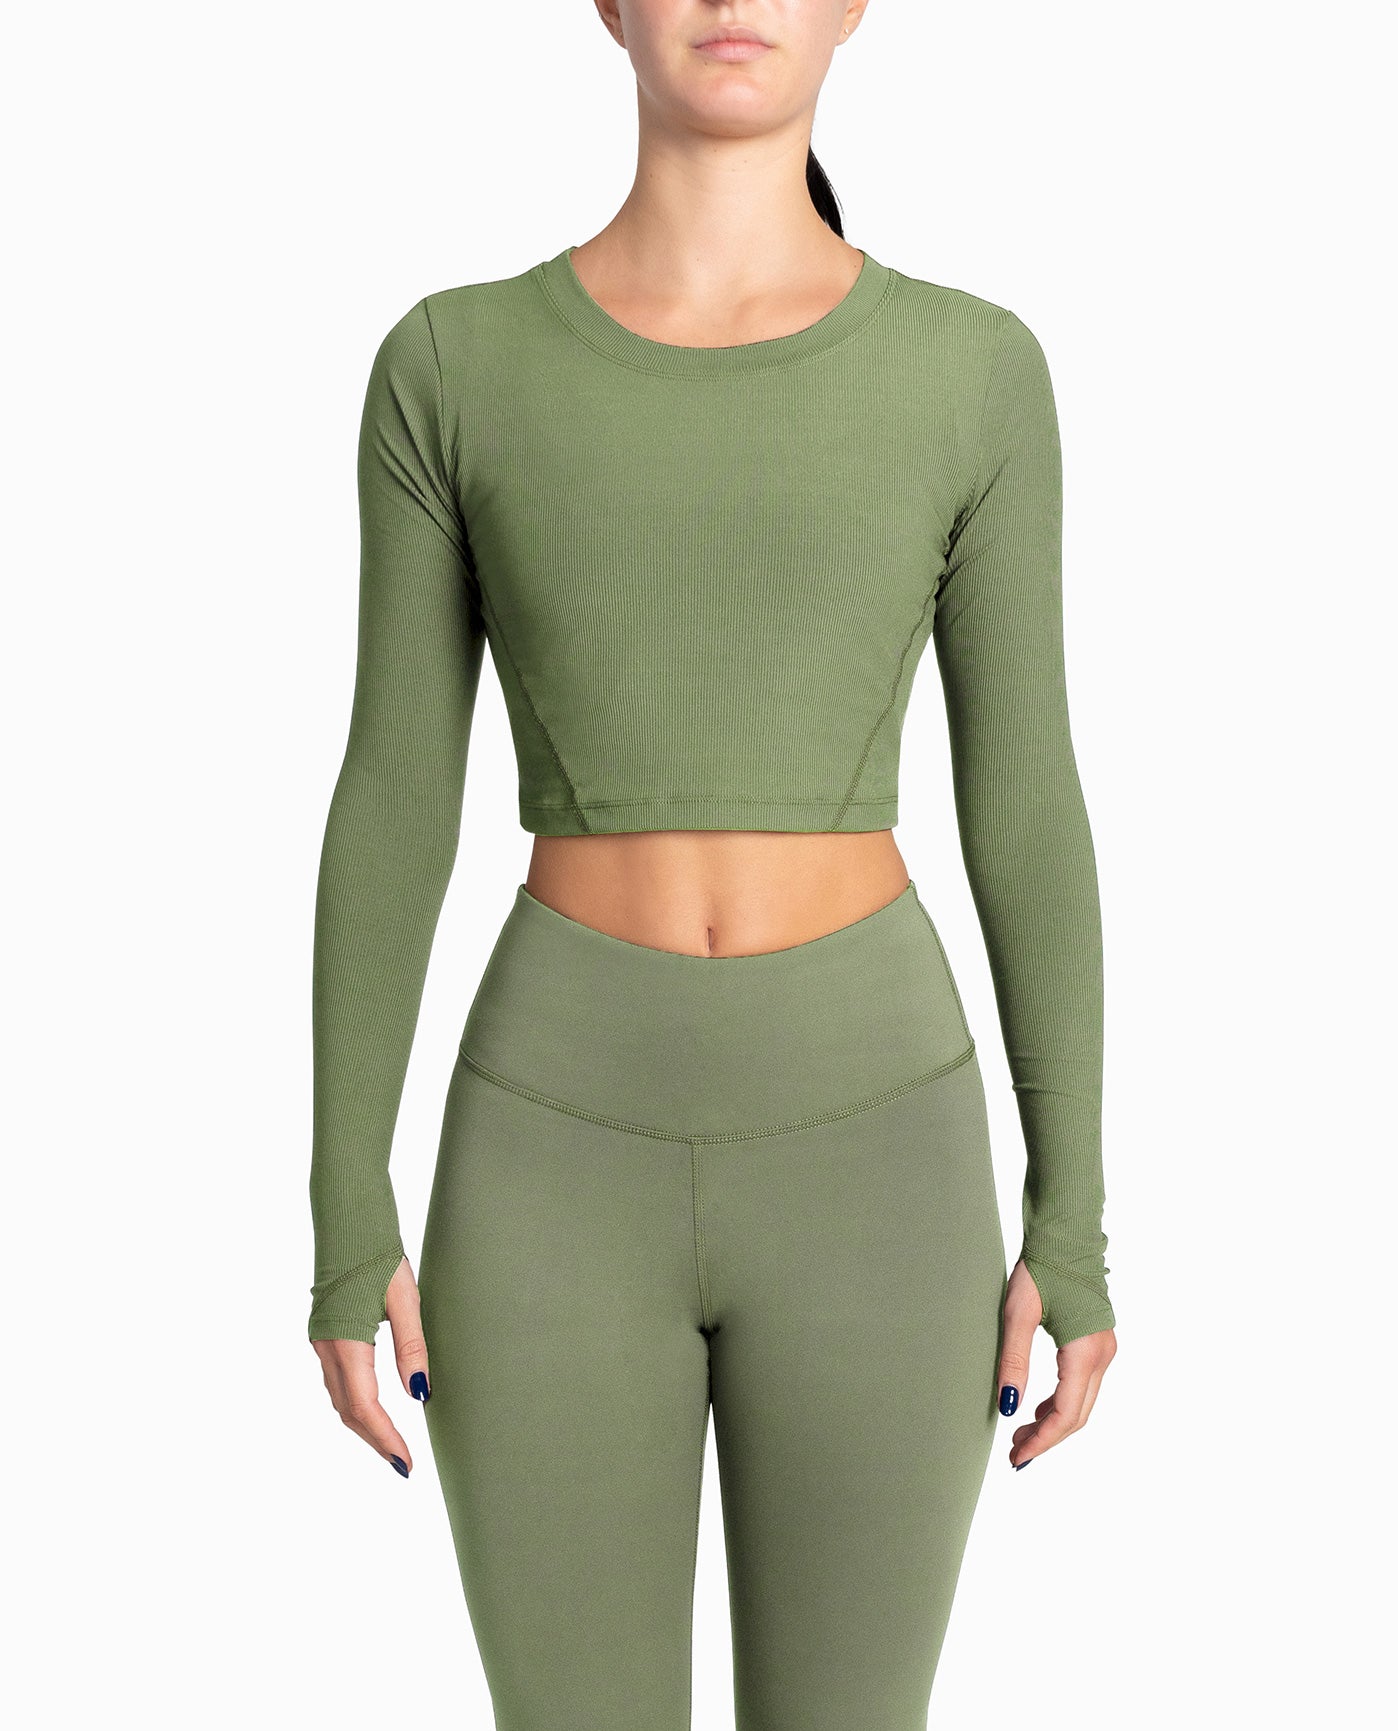 CROPPED ACTIVE LONG SLEEVE TOP